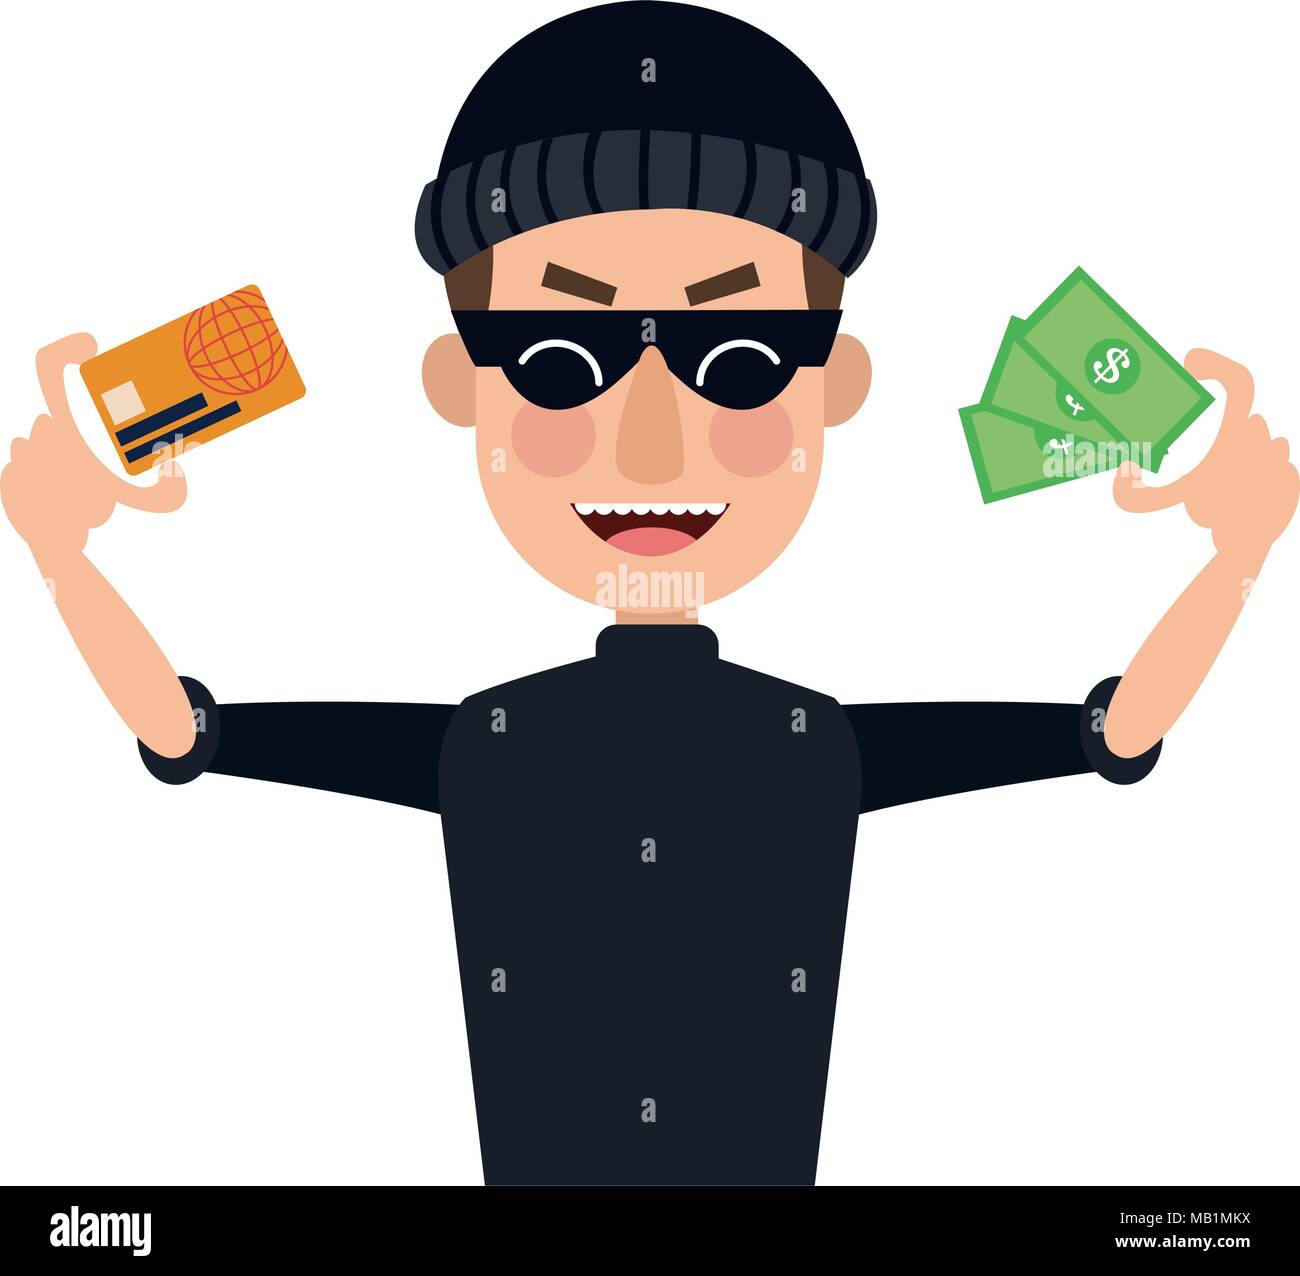 Hacker with credit card and money Stock Vector